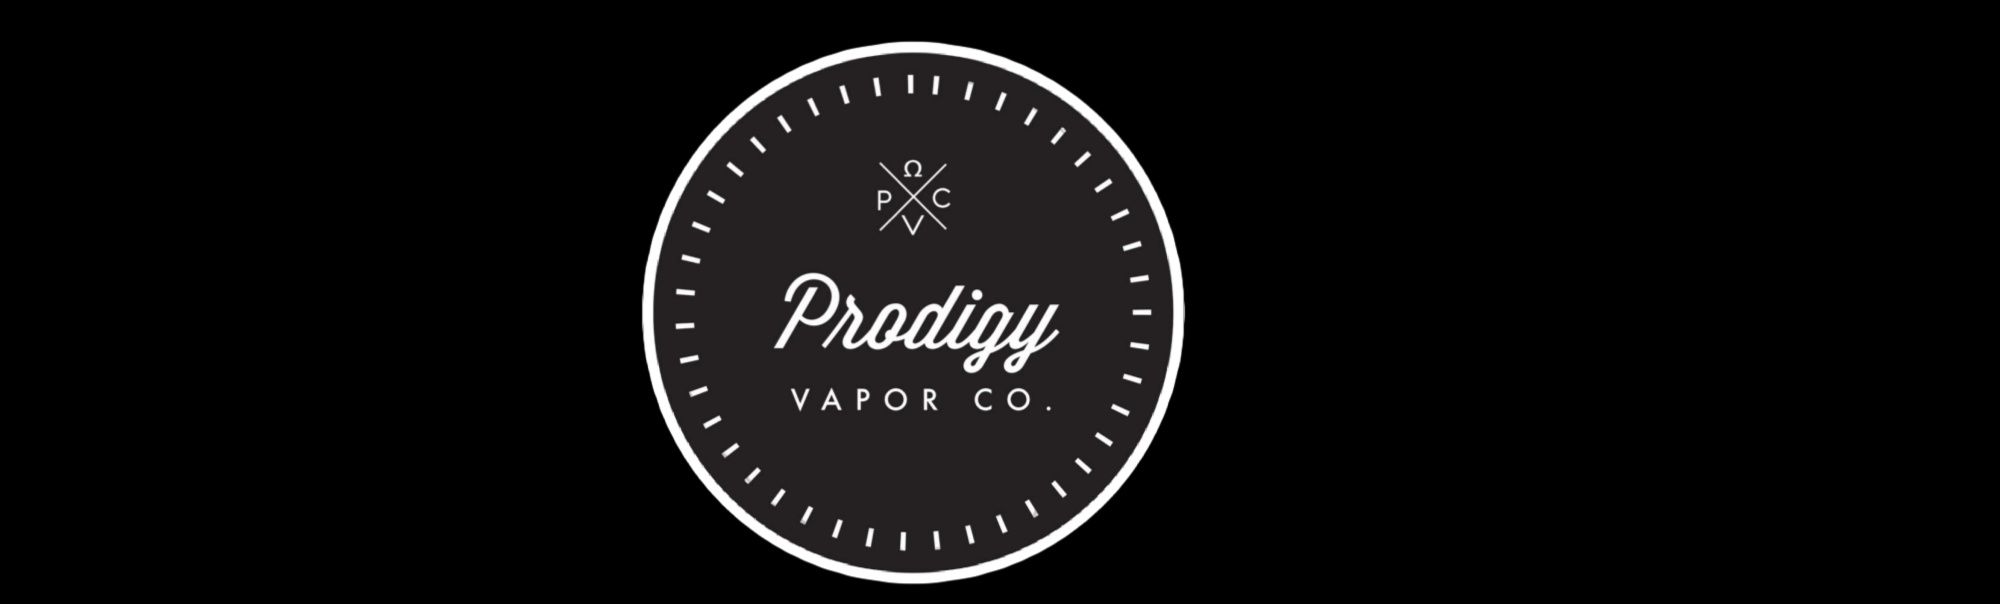 image of prodigy vapor in moore ok